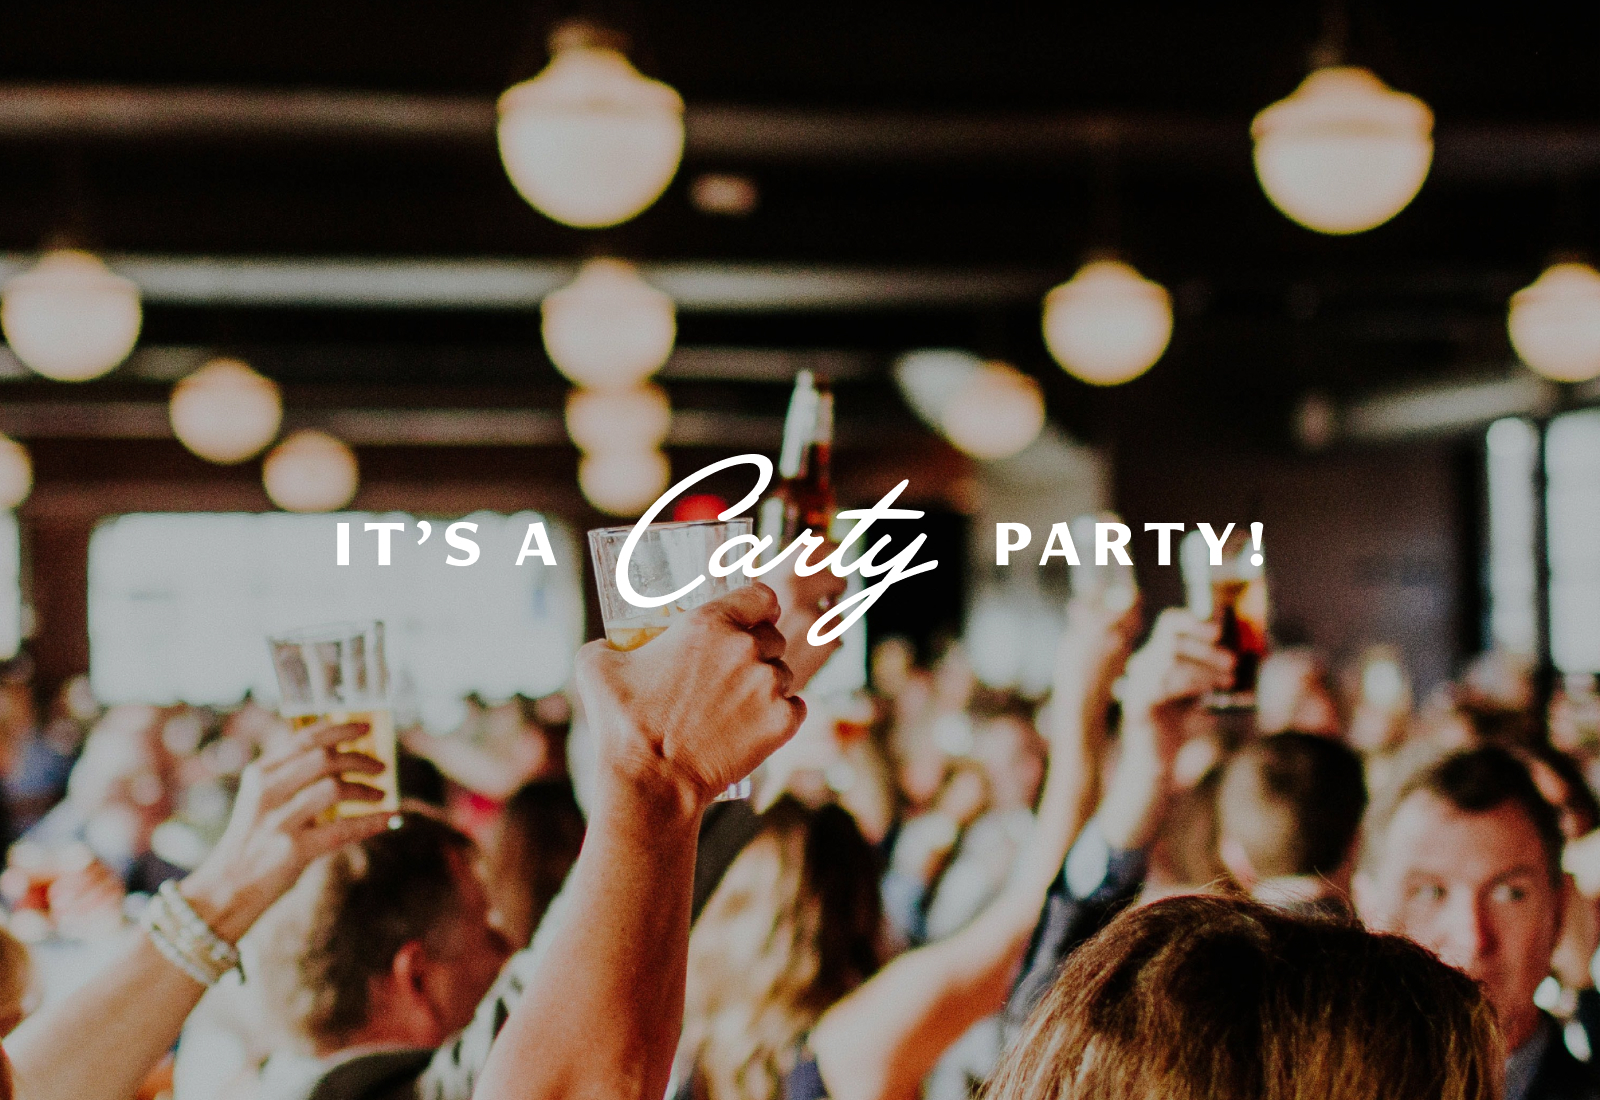 It's a Carty Party Tagline | The Carty Party Branding